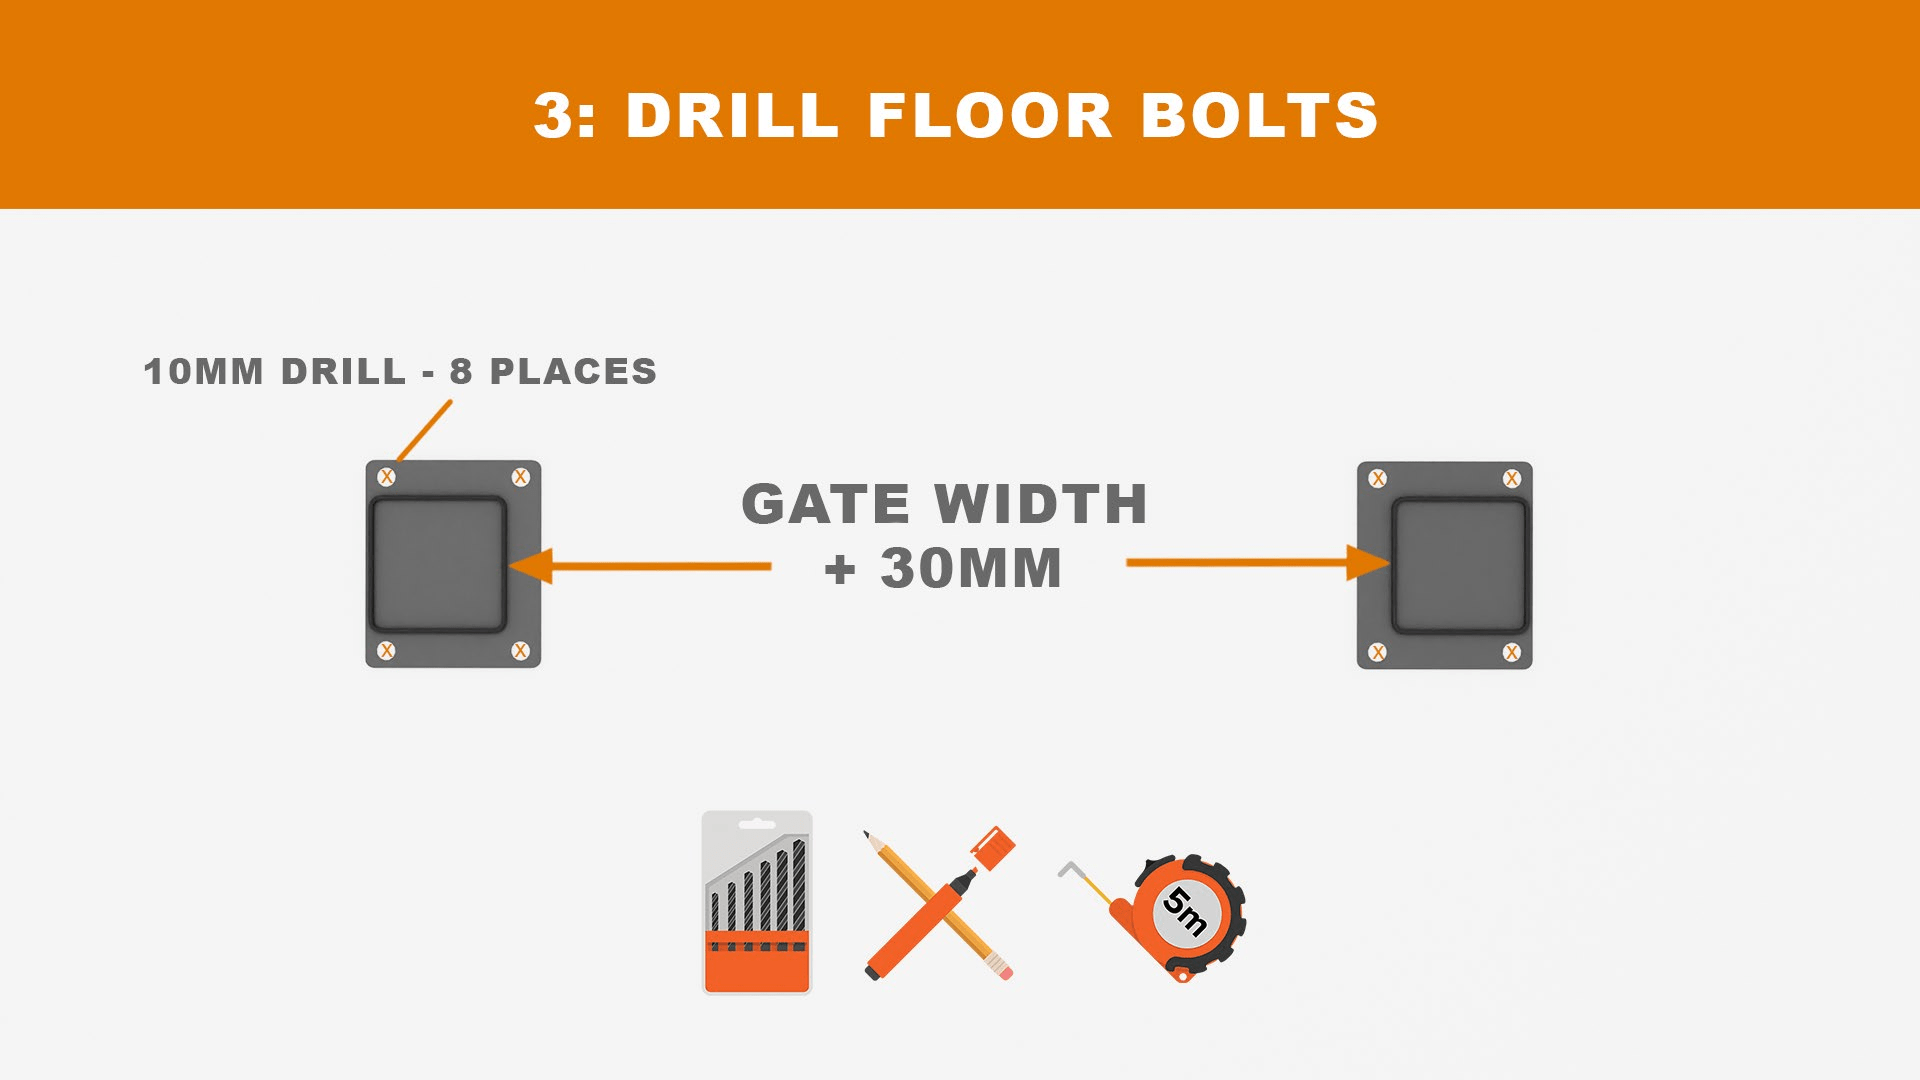 Drilling the floor bolts